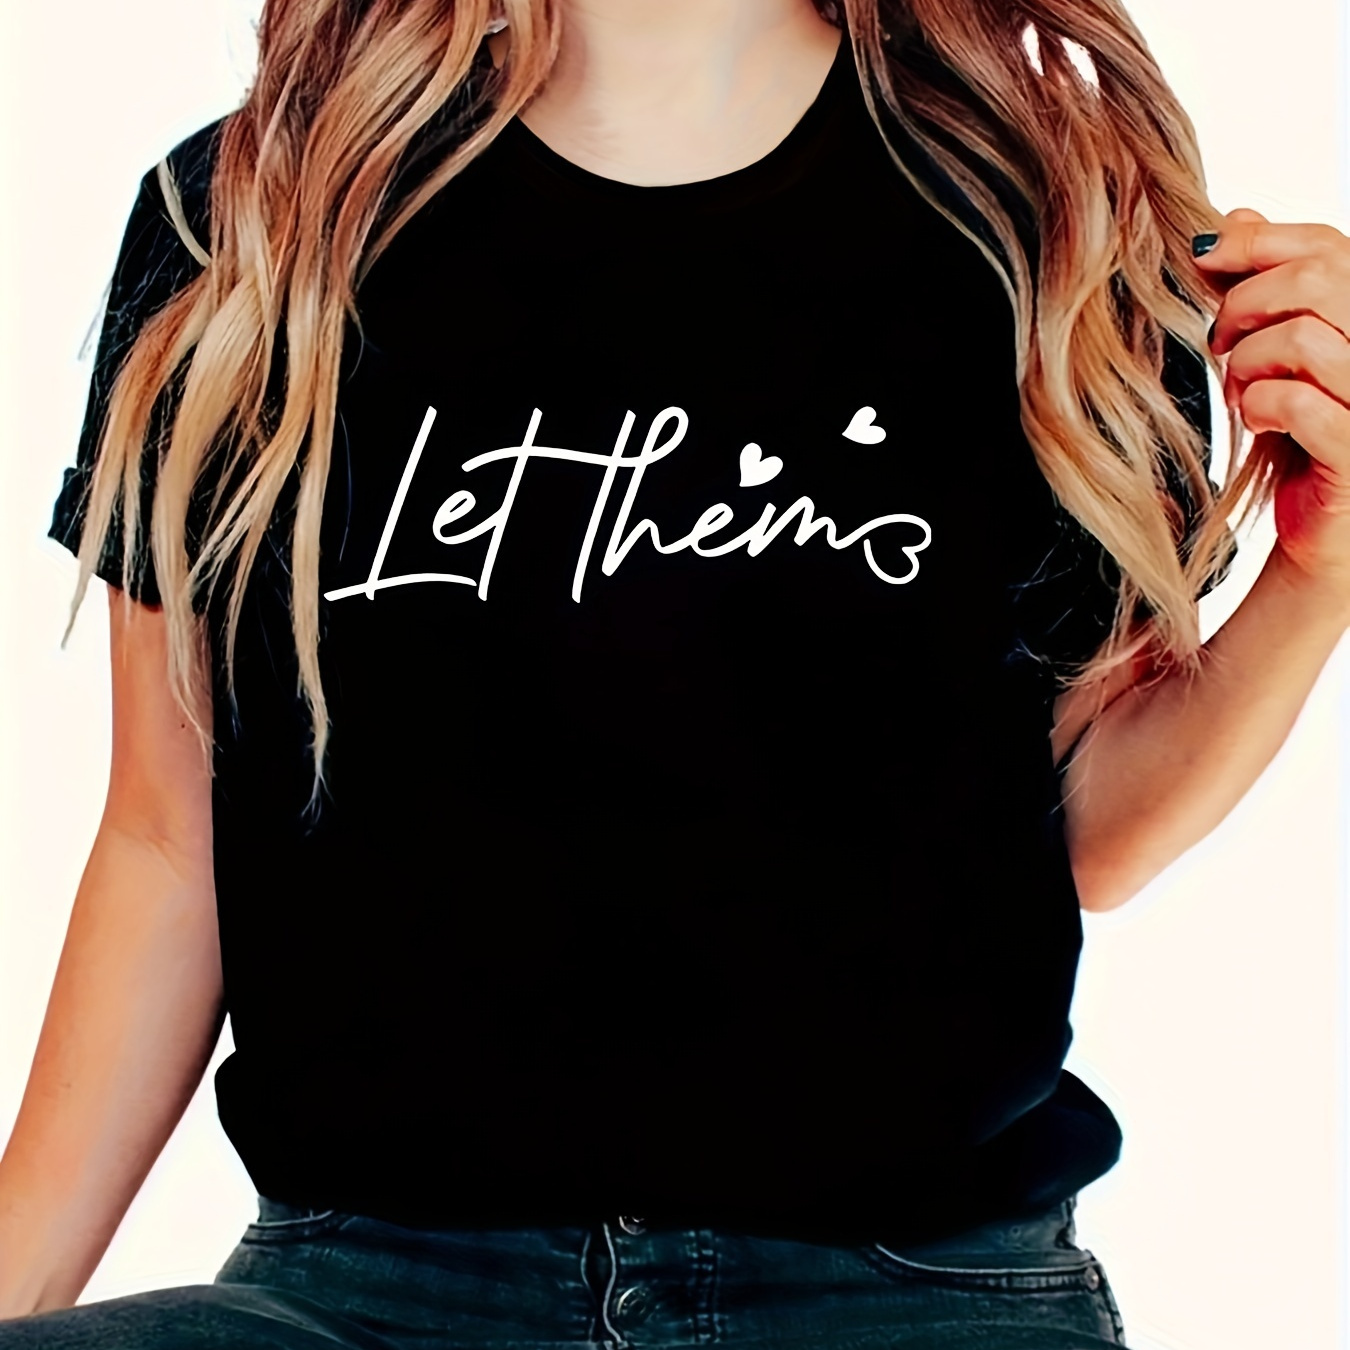 

Women's Casual Short Sleeve T-shirt, "let Them" Quote Print, Round Neck, Soft Comfortable Loose Fit Top – Fashionable Statement Tee